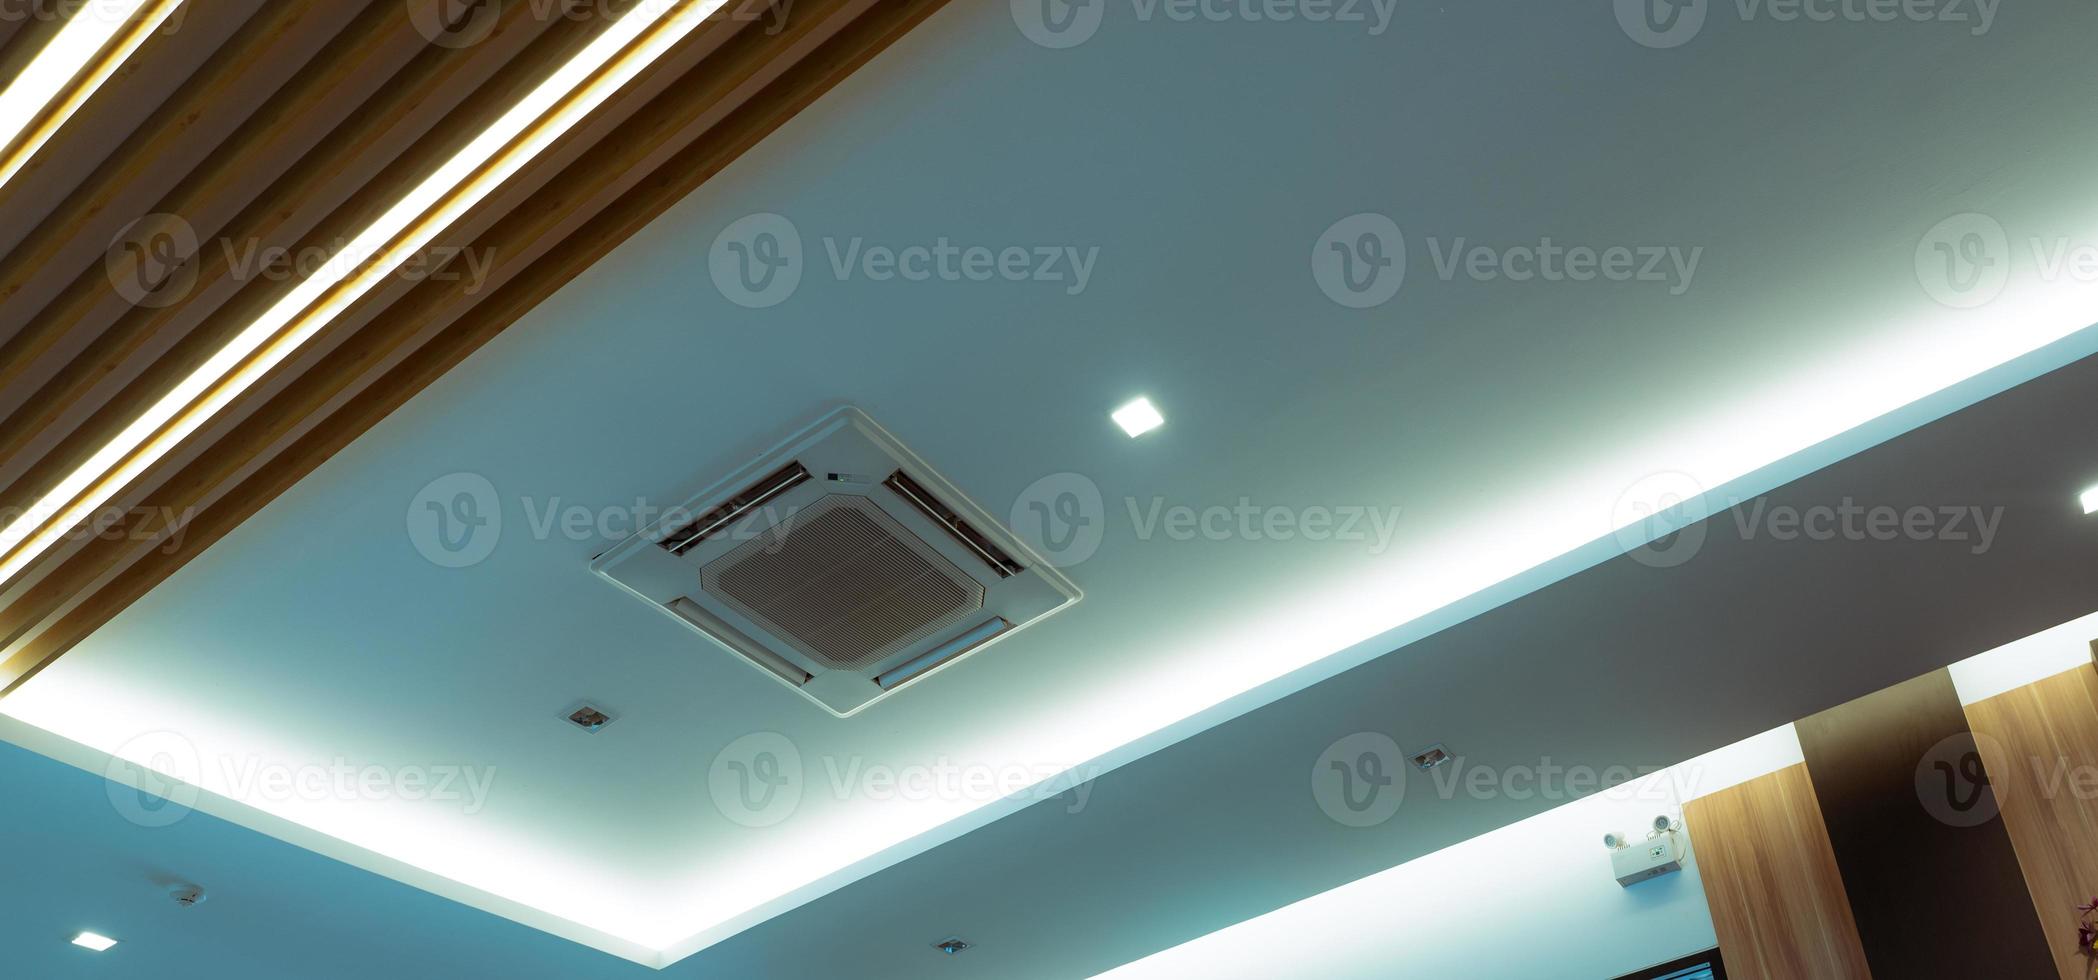 Selective focus on cassette type air conditioner mounted on ceiling wall. Air duct on ceiling in hotel. Air heading unit on gypsum wall. Cool system in the building. Air flow and ventilation system. photo